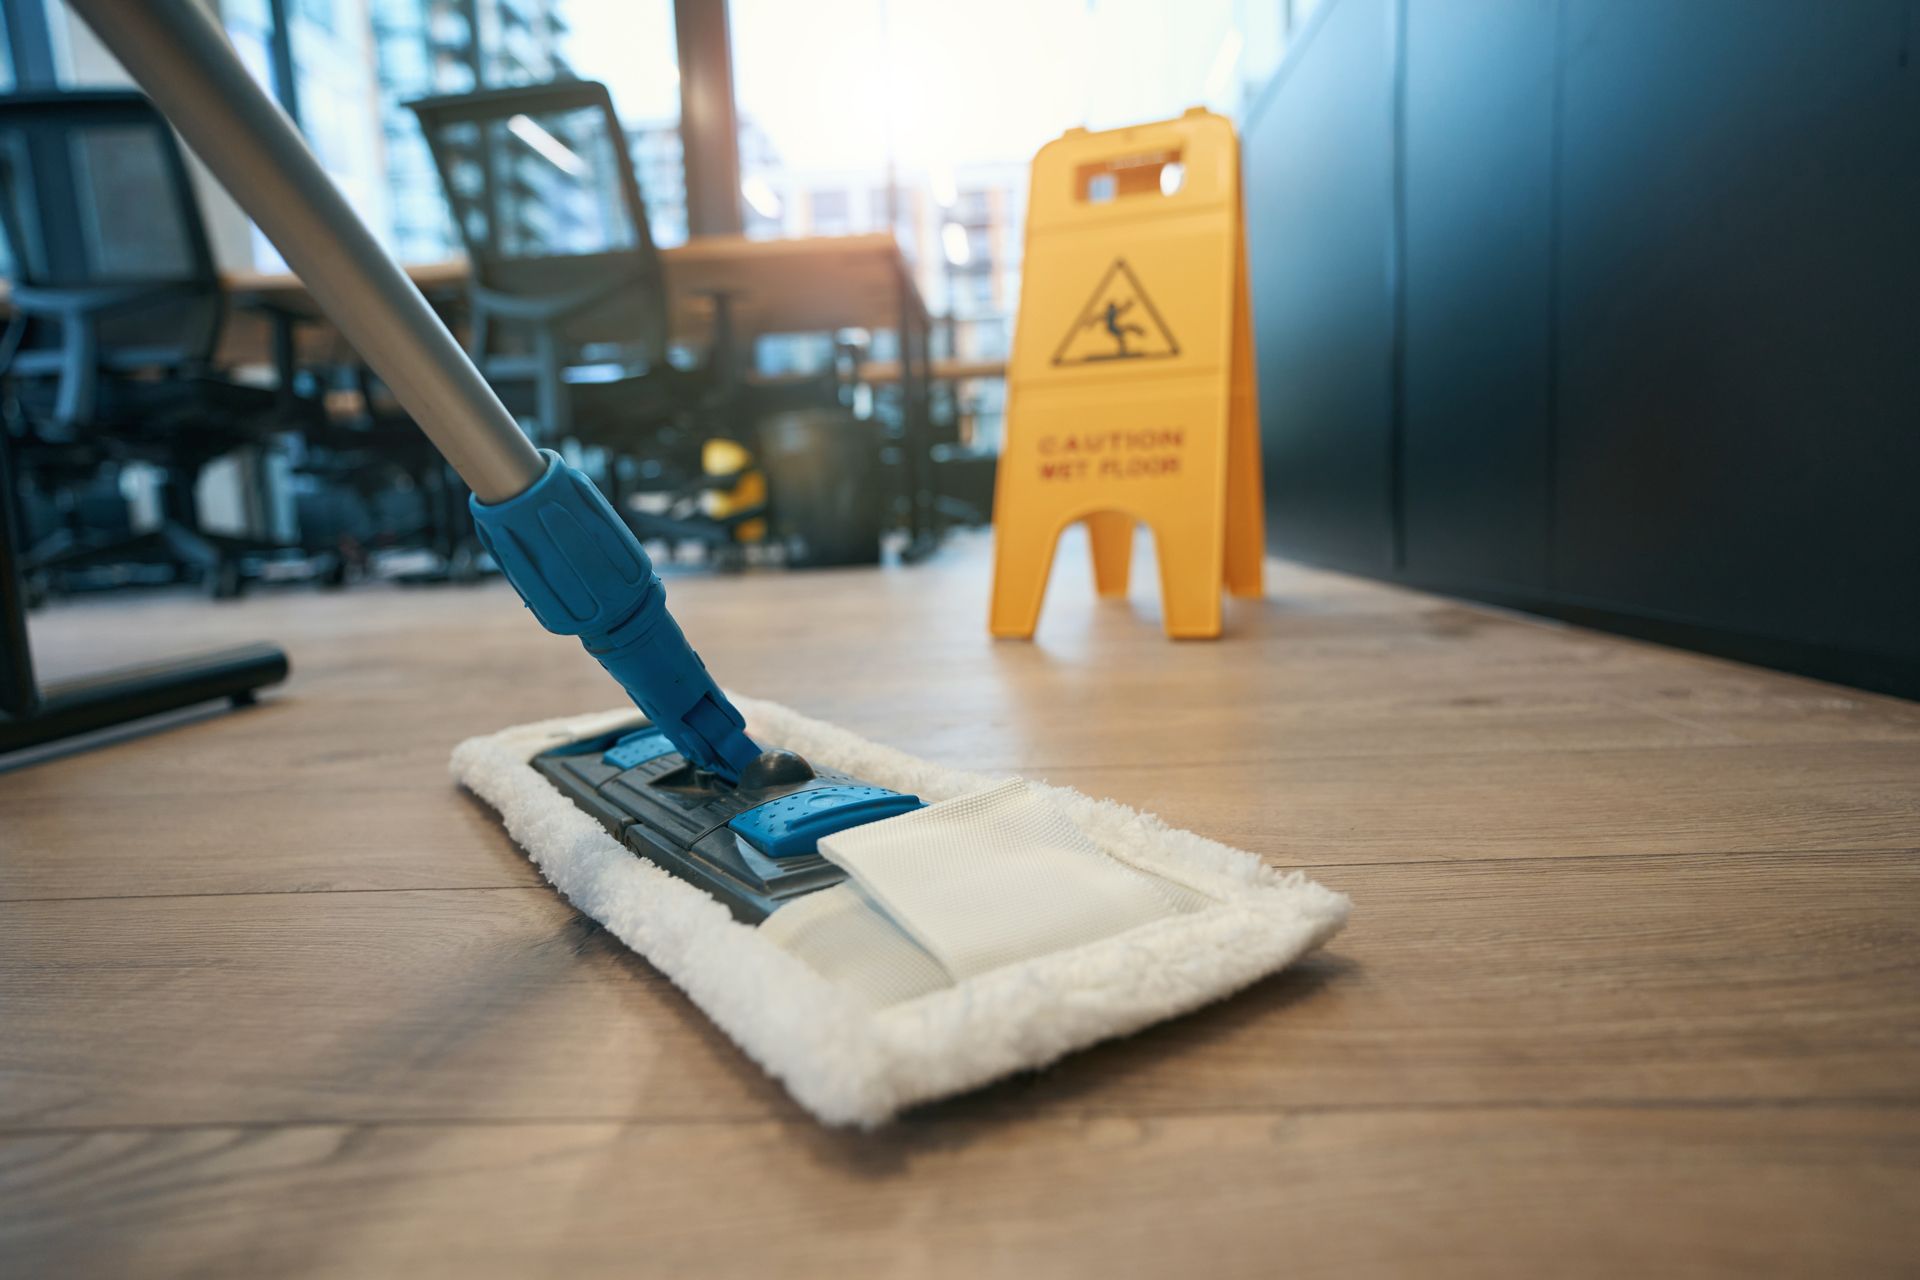 A mop is being used to clean a wooden floor in an office